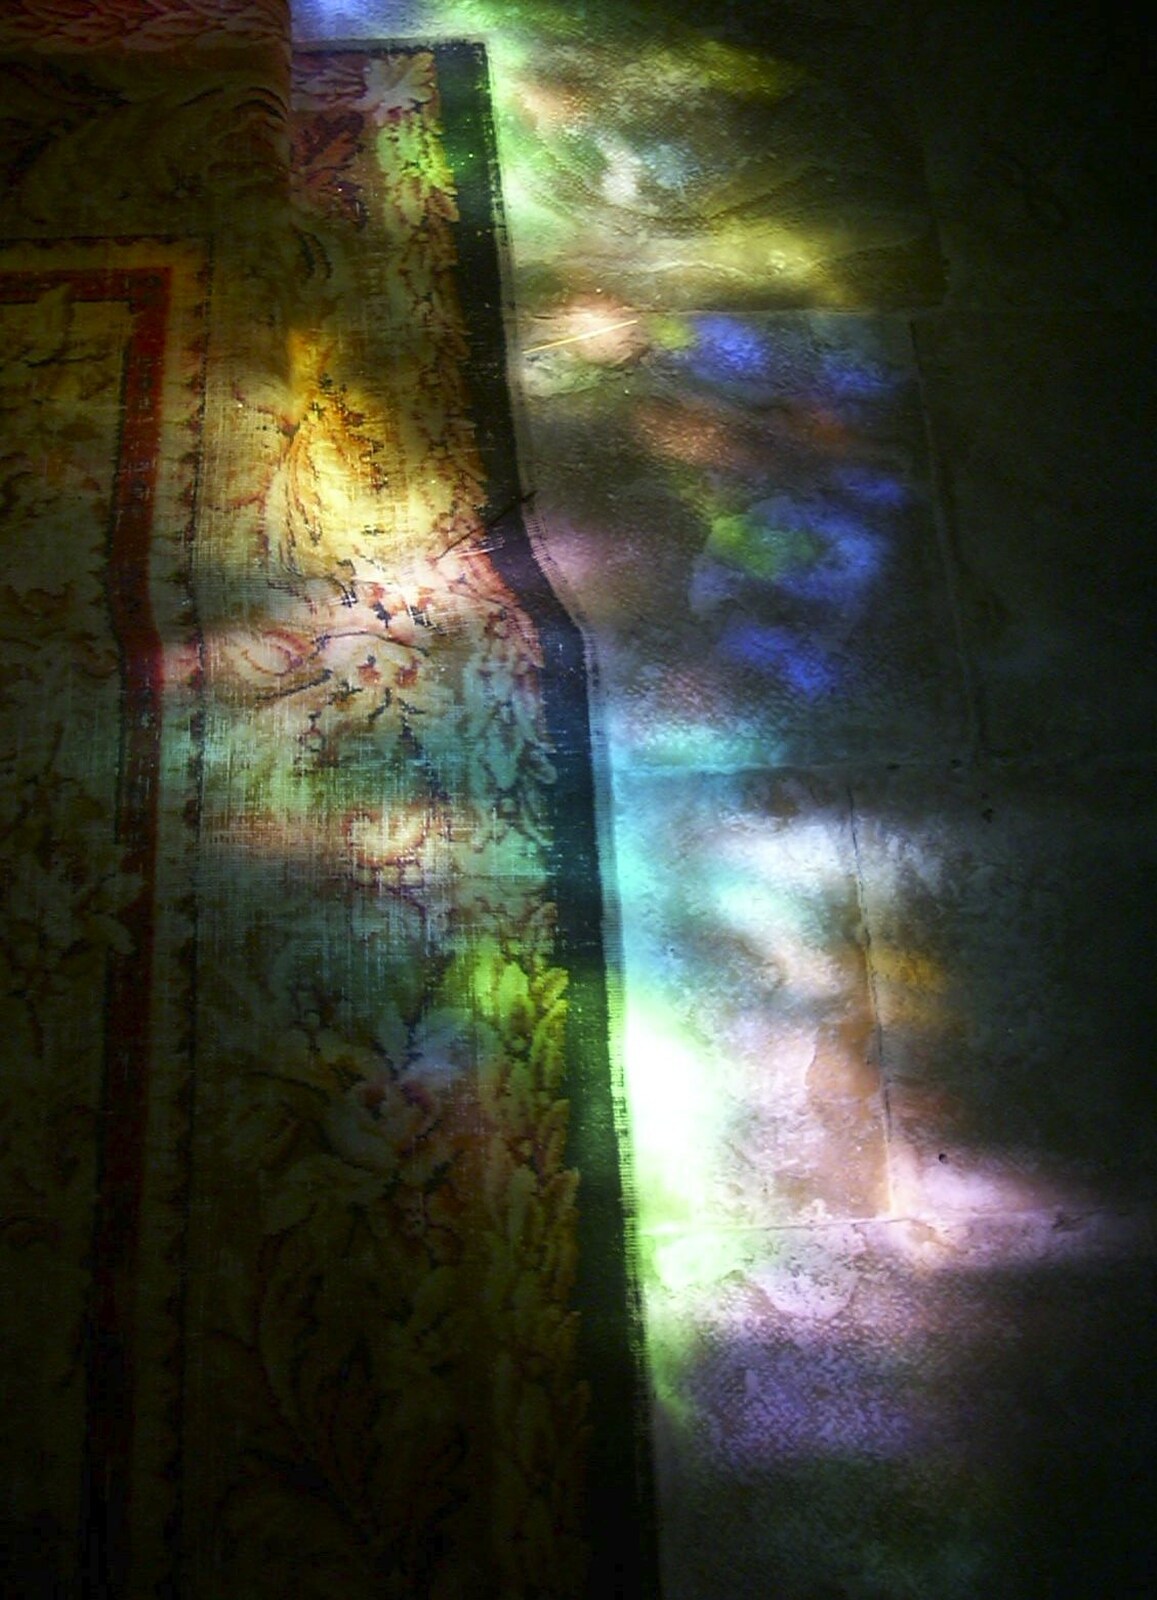 Stained glass casts coloured light on the floor from A Short Holiday in Chivres, Burgundy, France - 21st July 2001